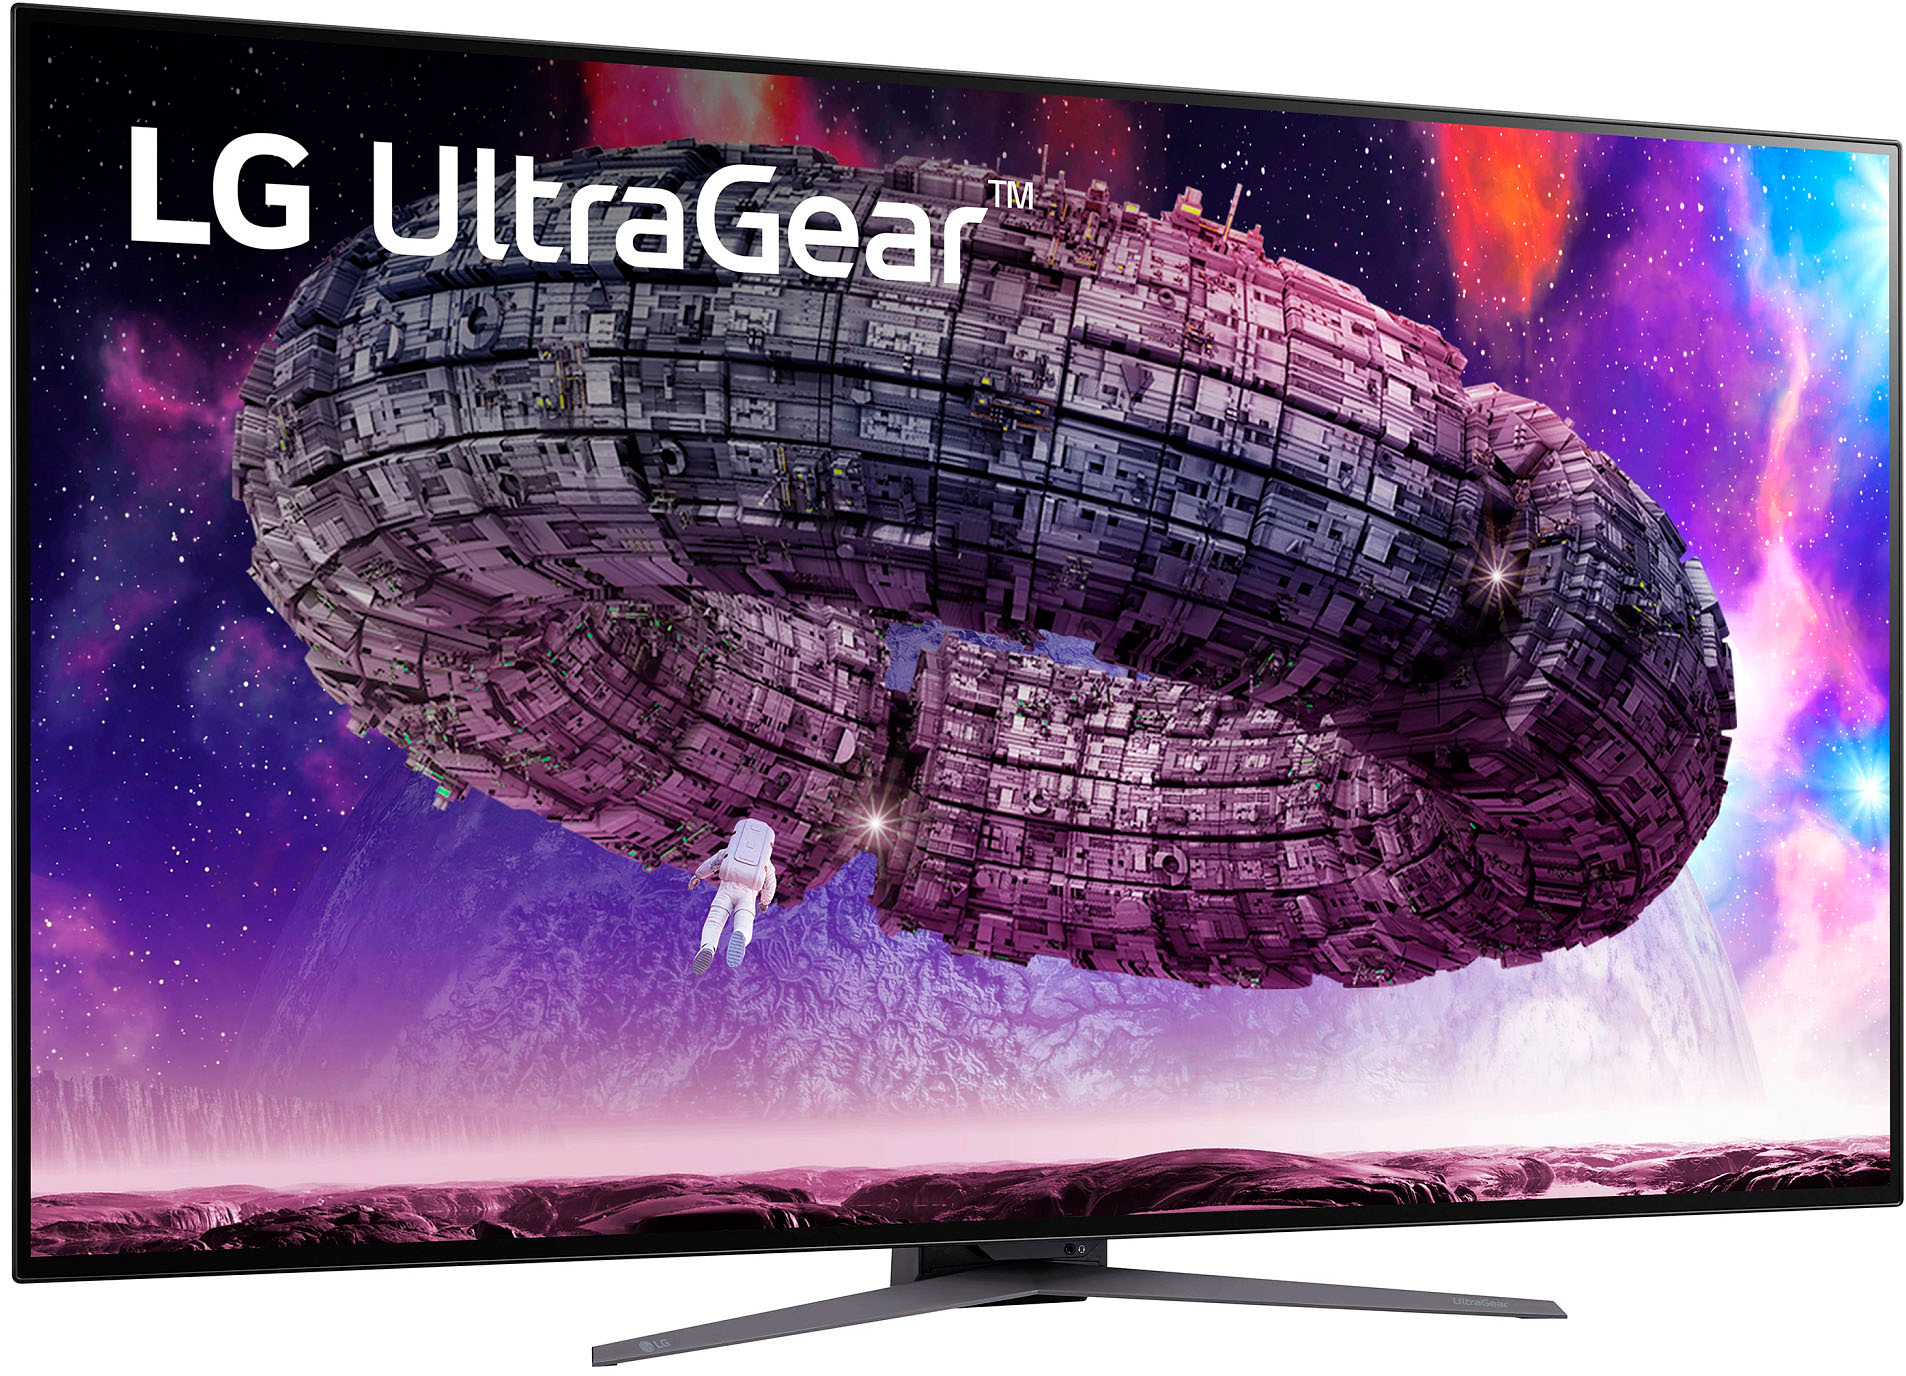 Back View: LG - UltraGear 48” OLED 4K UHD .1-ms G-SYNC Compatible and AMD FreeSync Gaming Monitor with HDR (DisplayPort, HDMI, USB) - Black